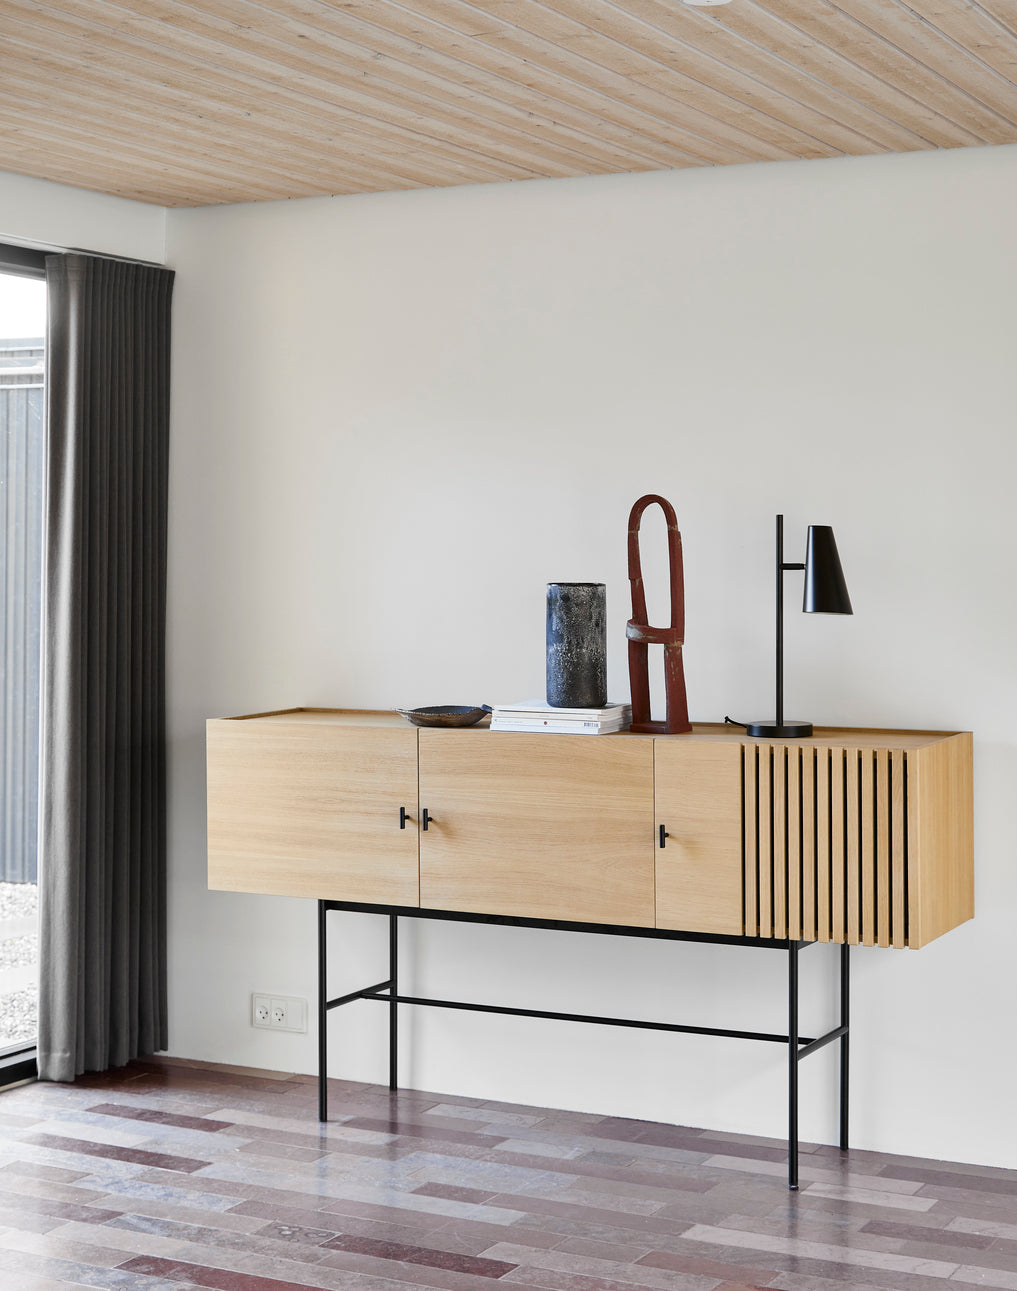 array sideboard (180 cm) - white pigmented oak by woud at adorn.house